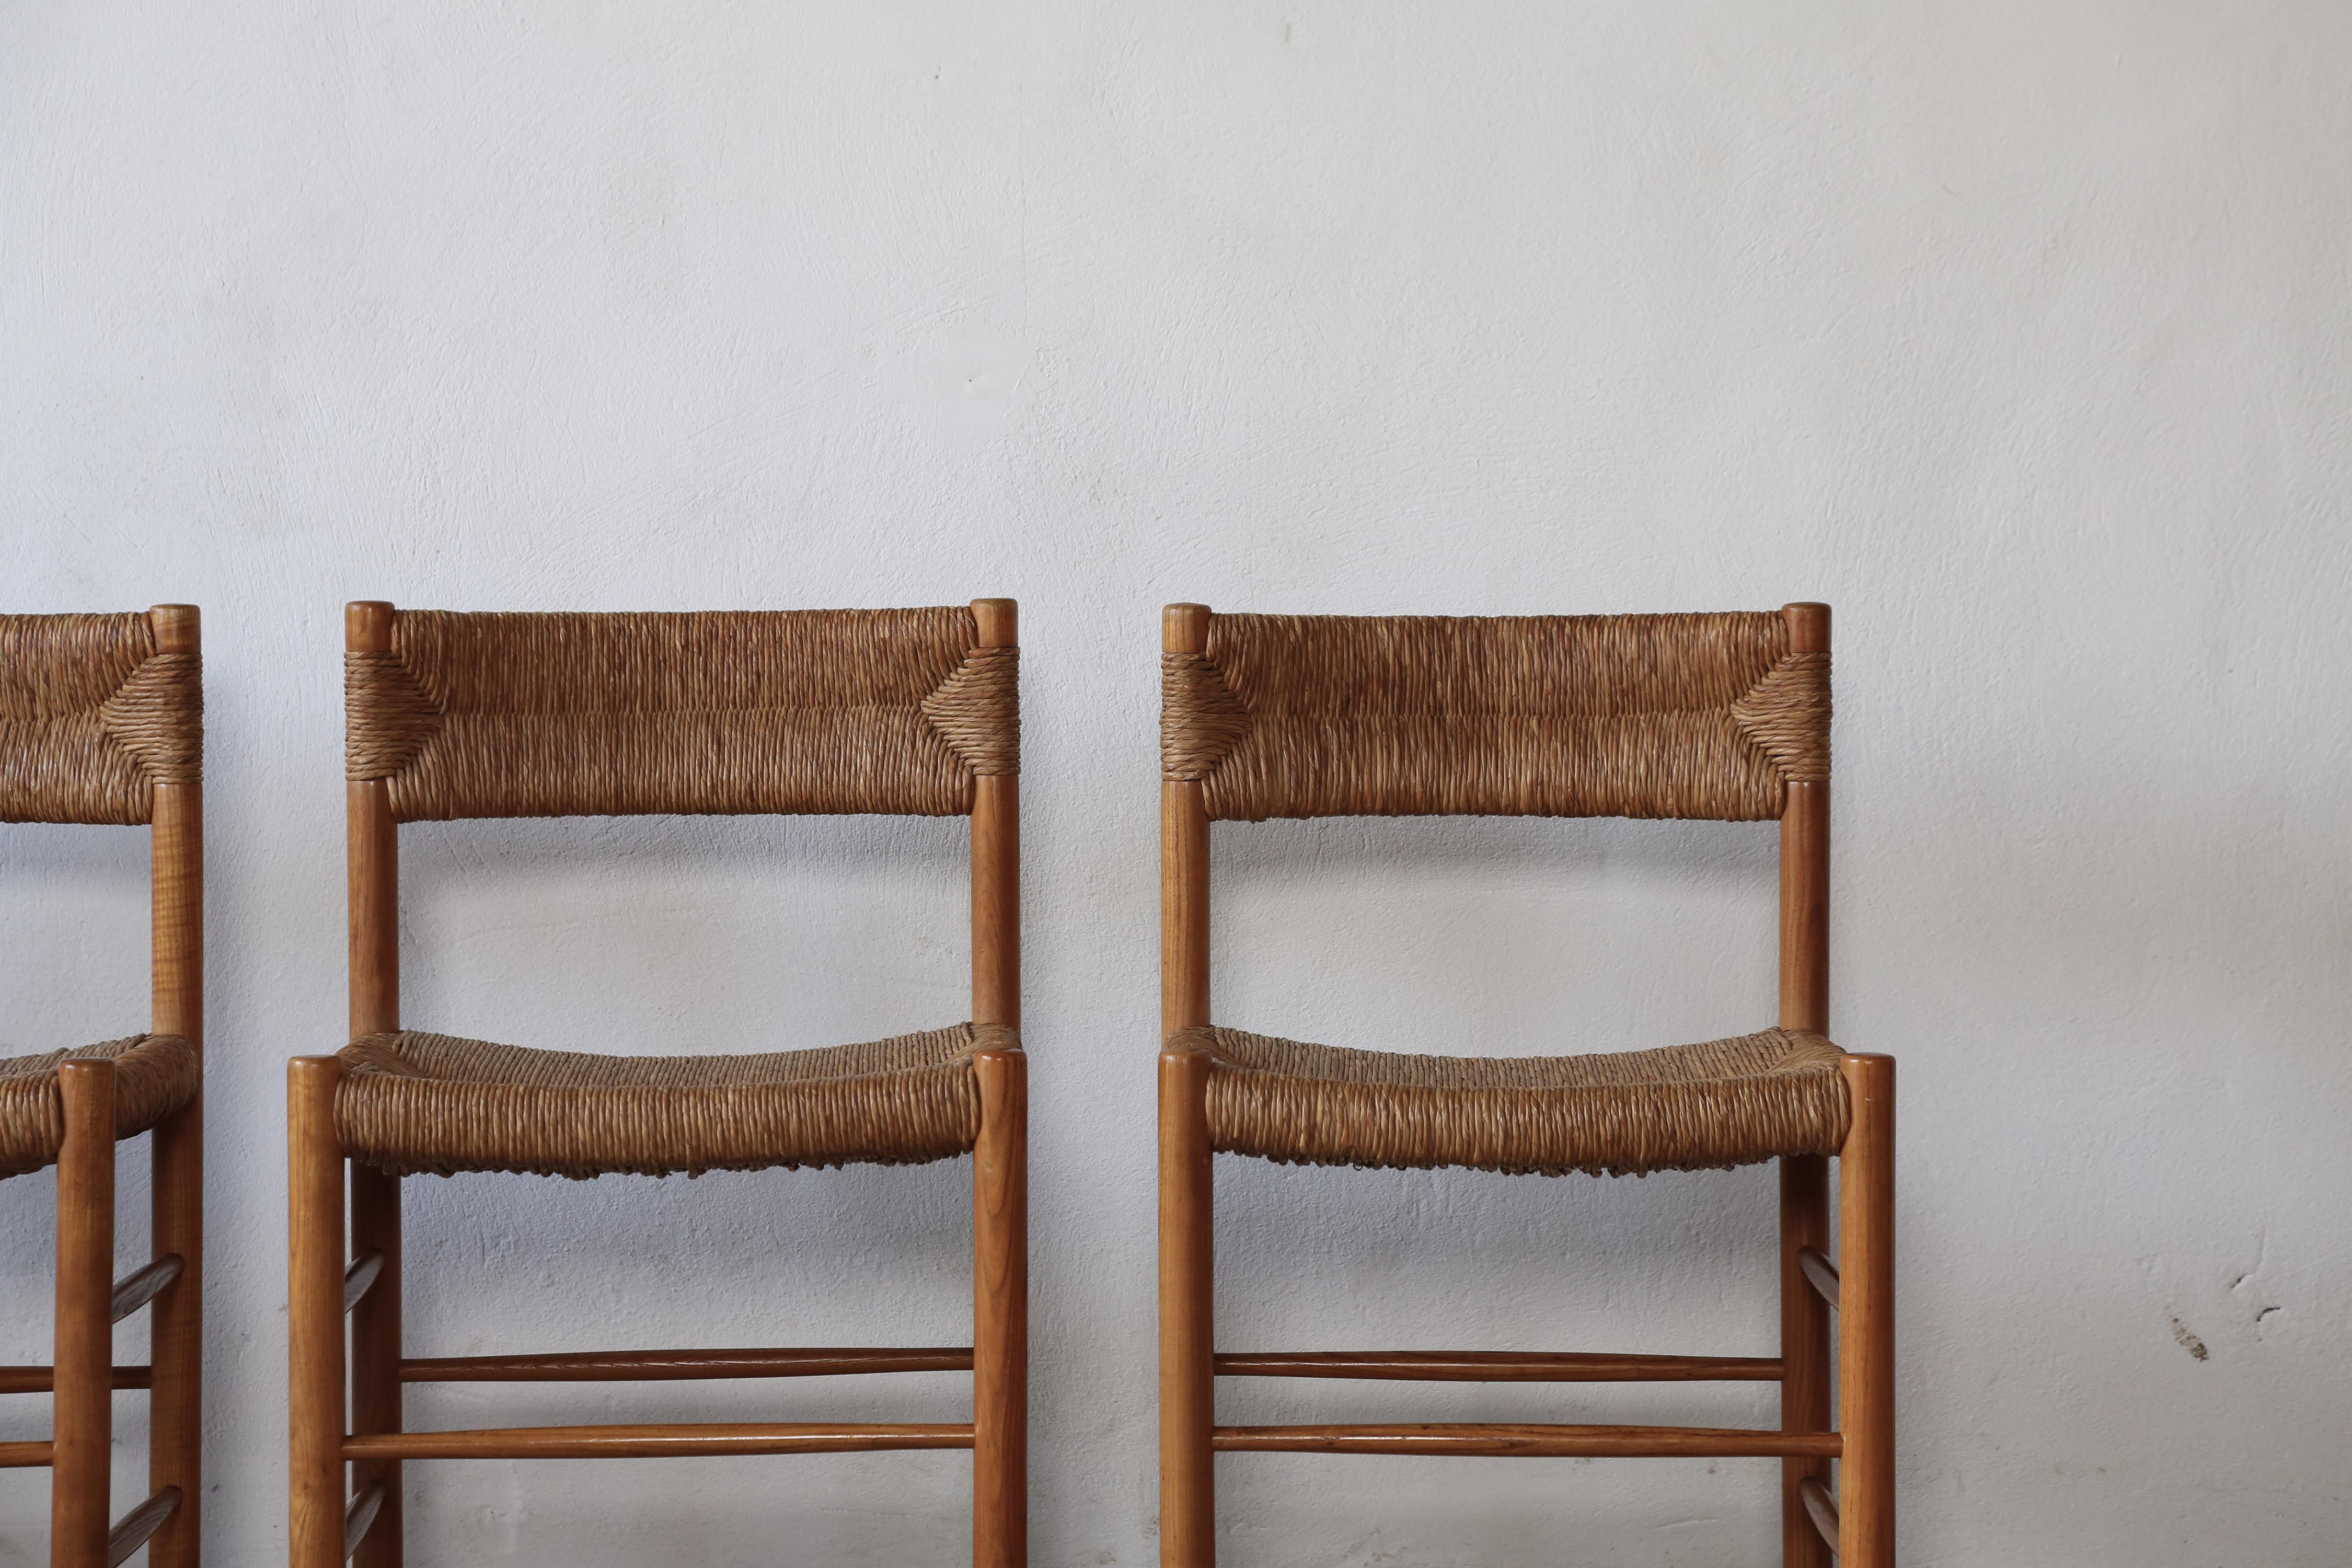 French Original Charlotte Perriand / Robert Sentou Dordogne Chairs, France, 1960s For Sale